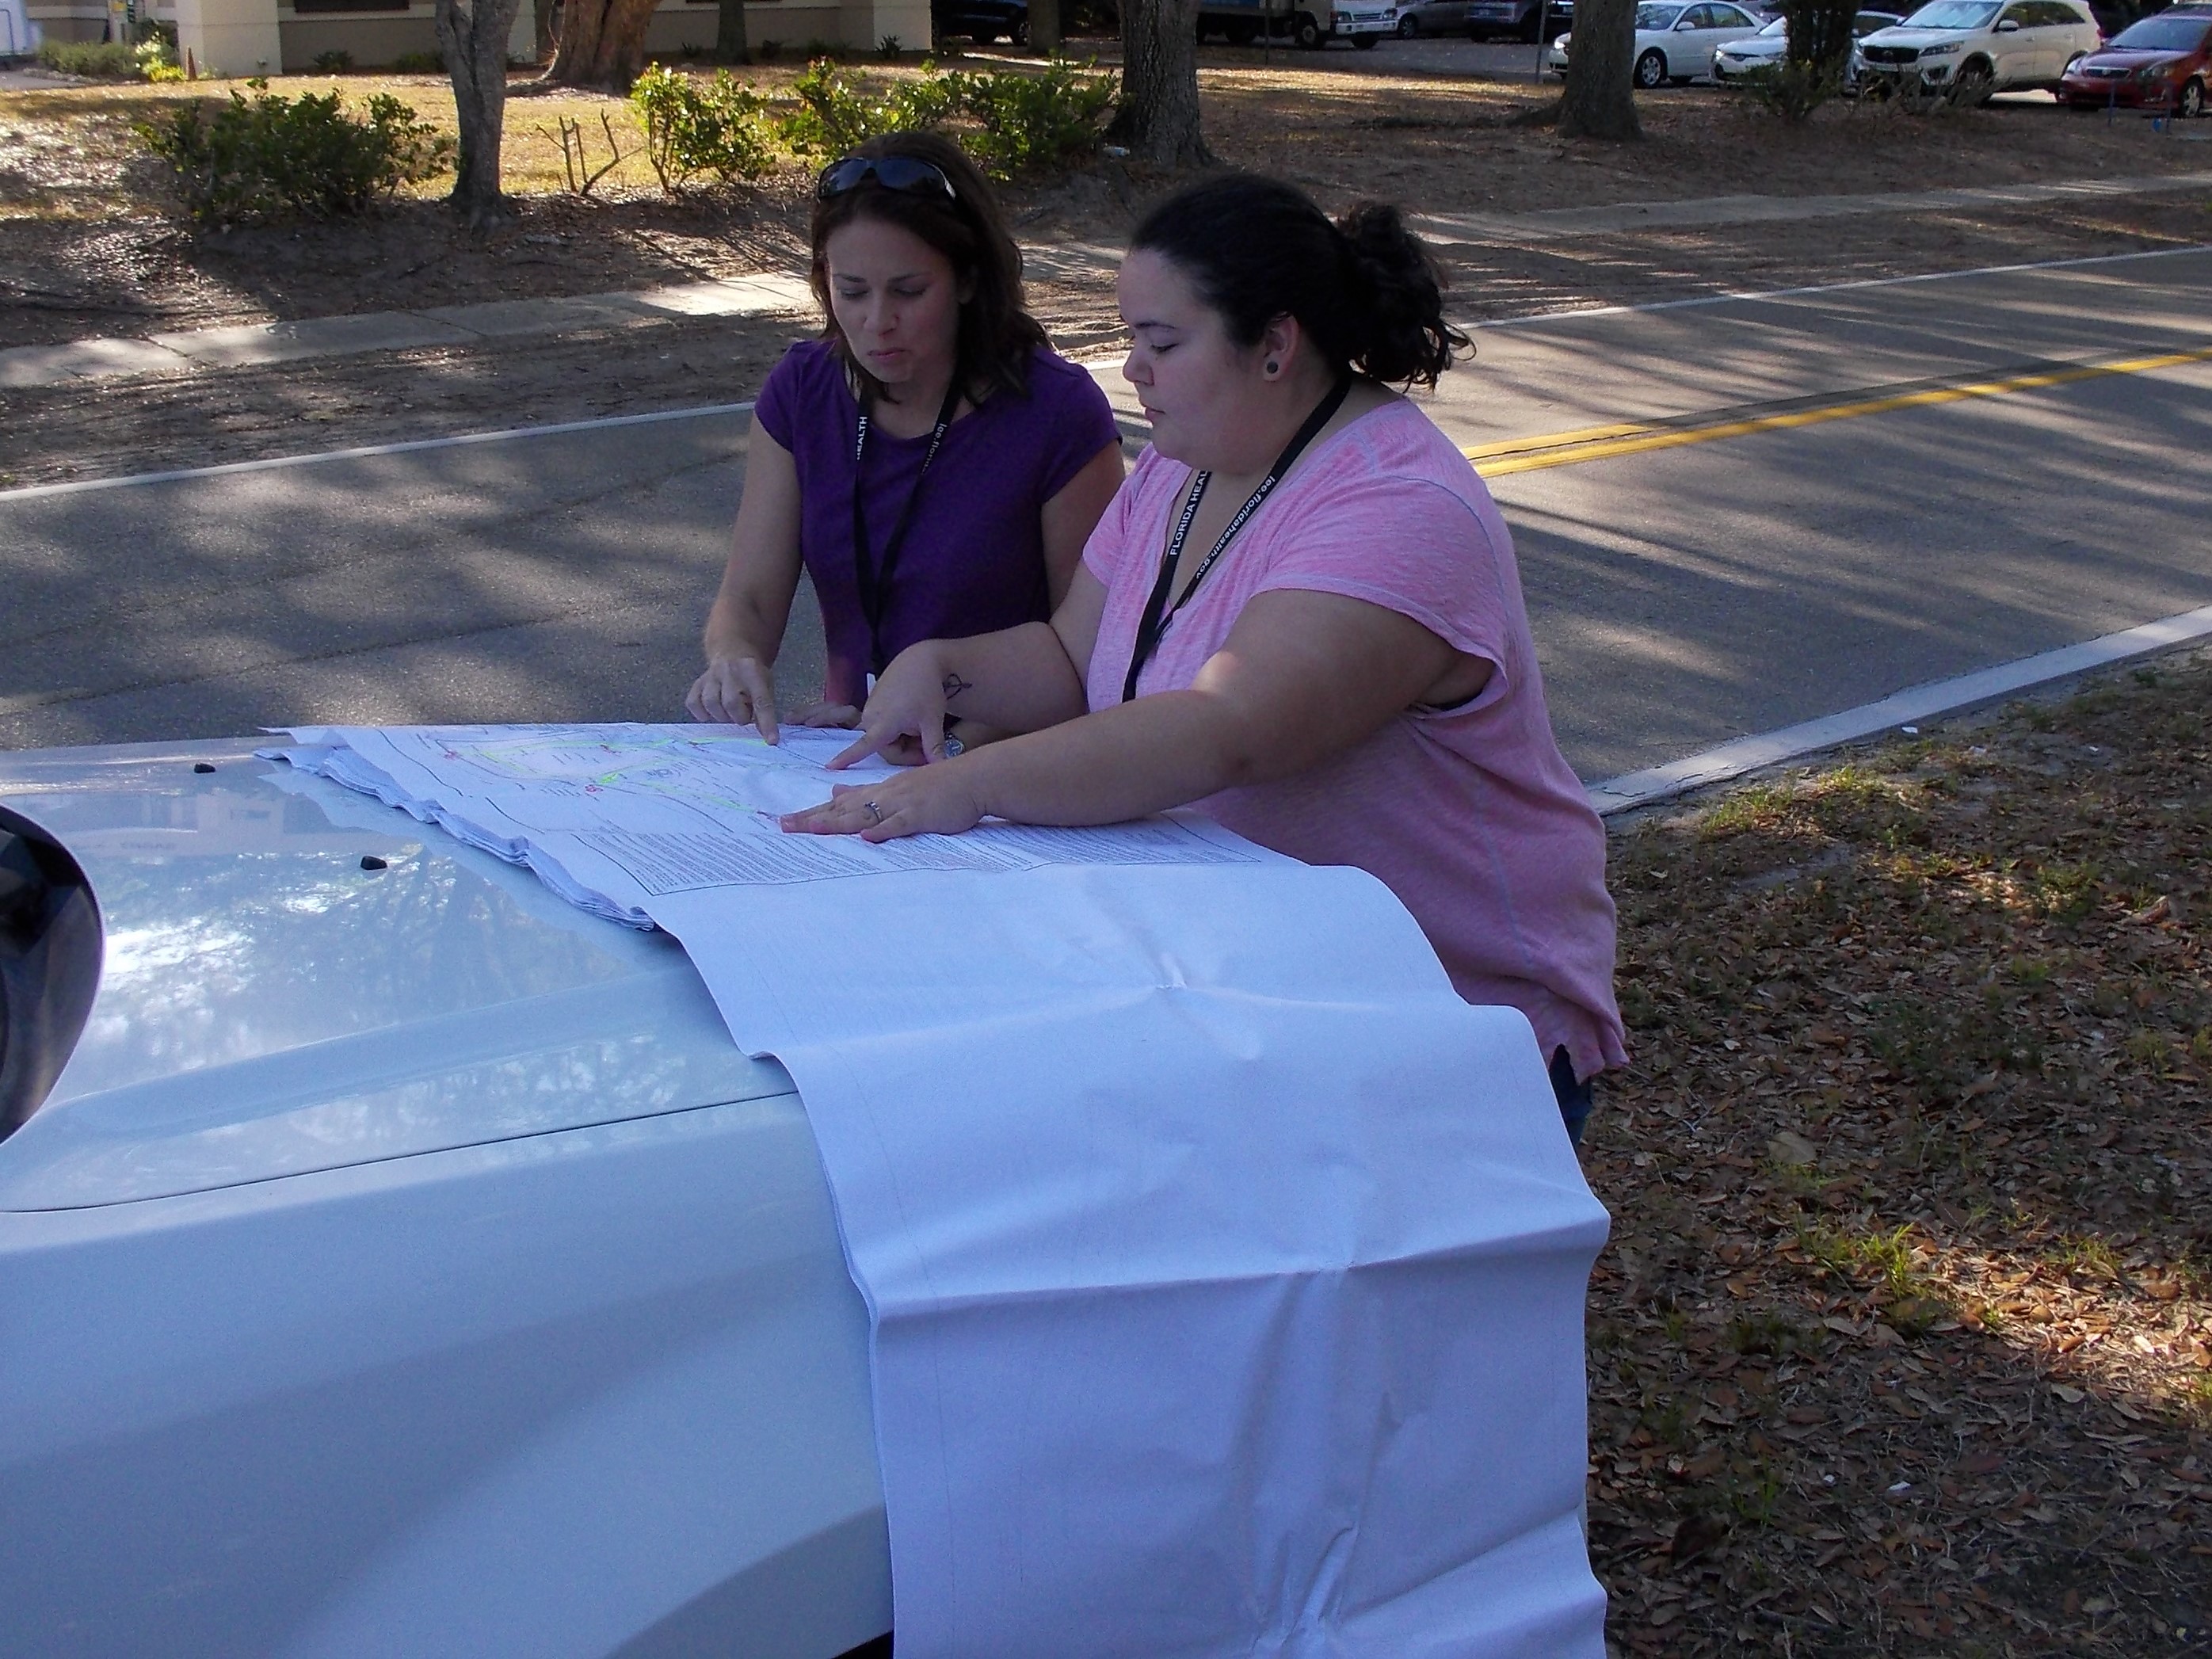 Left to Right – Stacy Nichols and Andrea Garcia reviewing blueprints